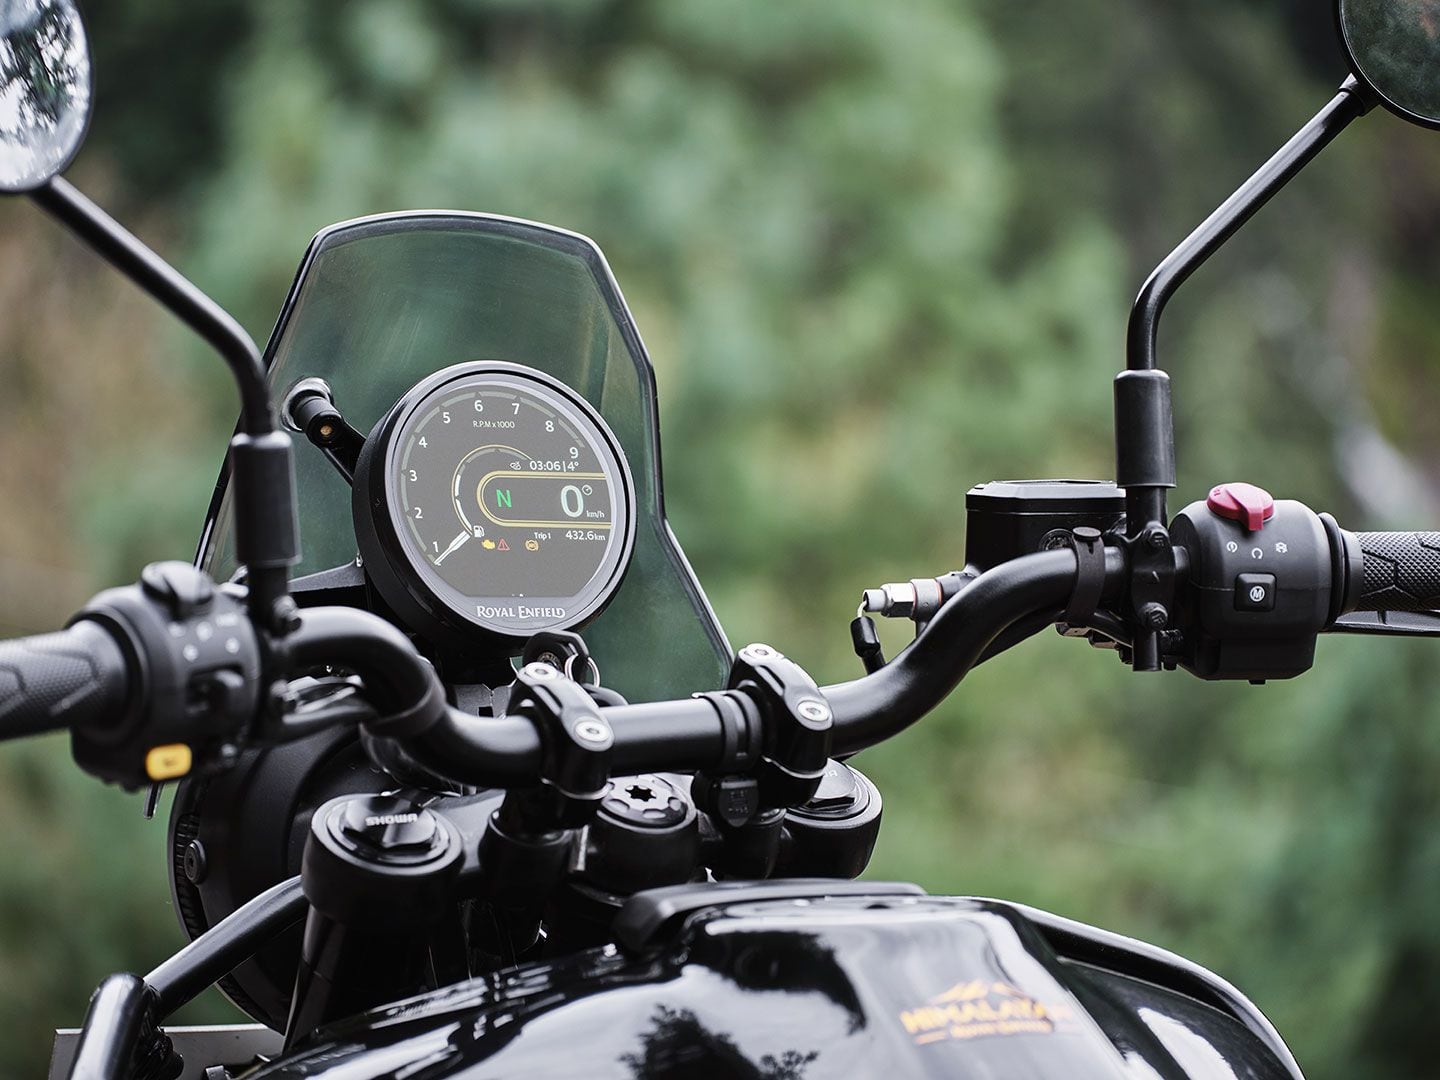 Royal Enfield Developing 650 CC Bullet, To Be The Most Affordable 650?